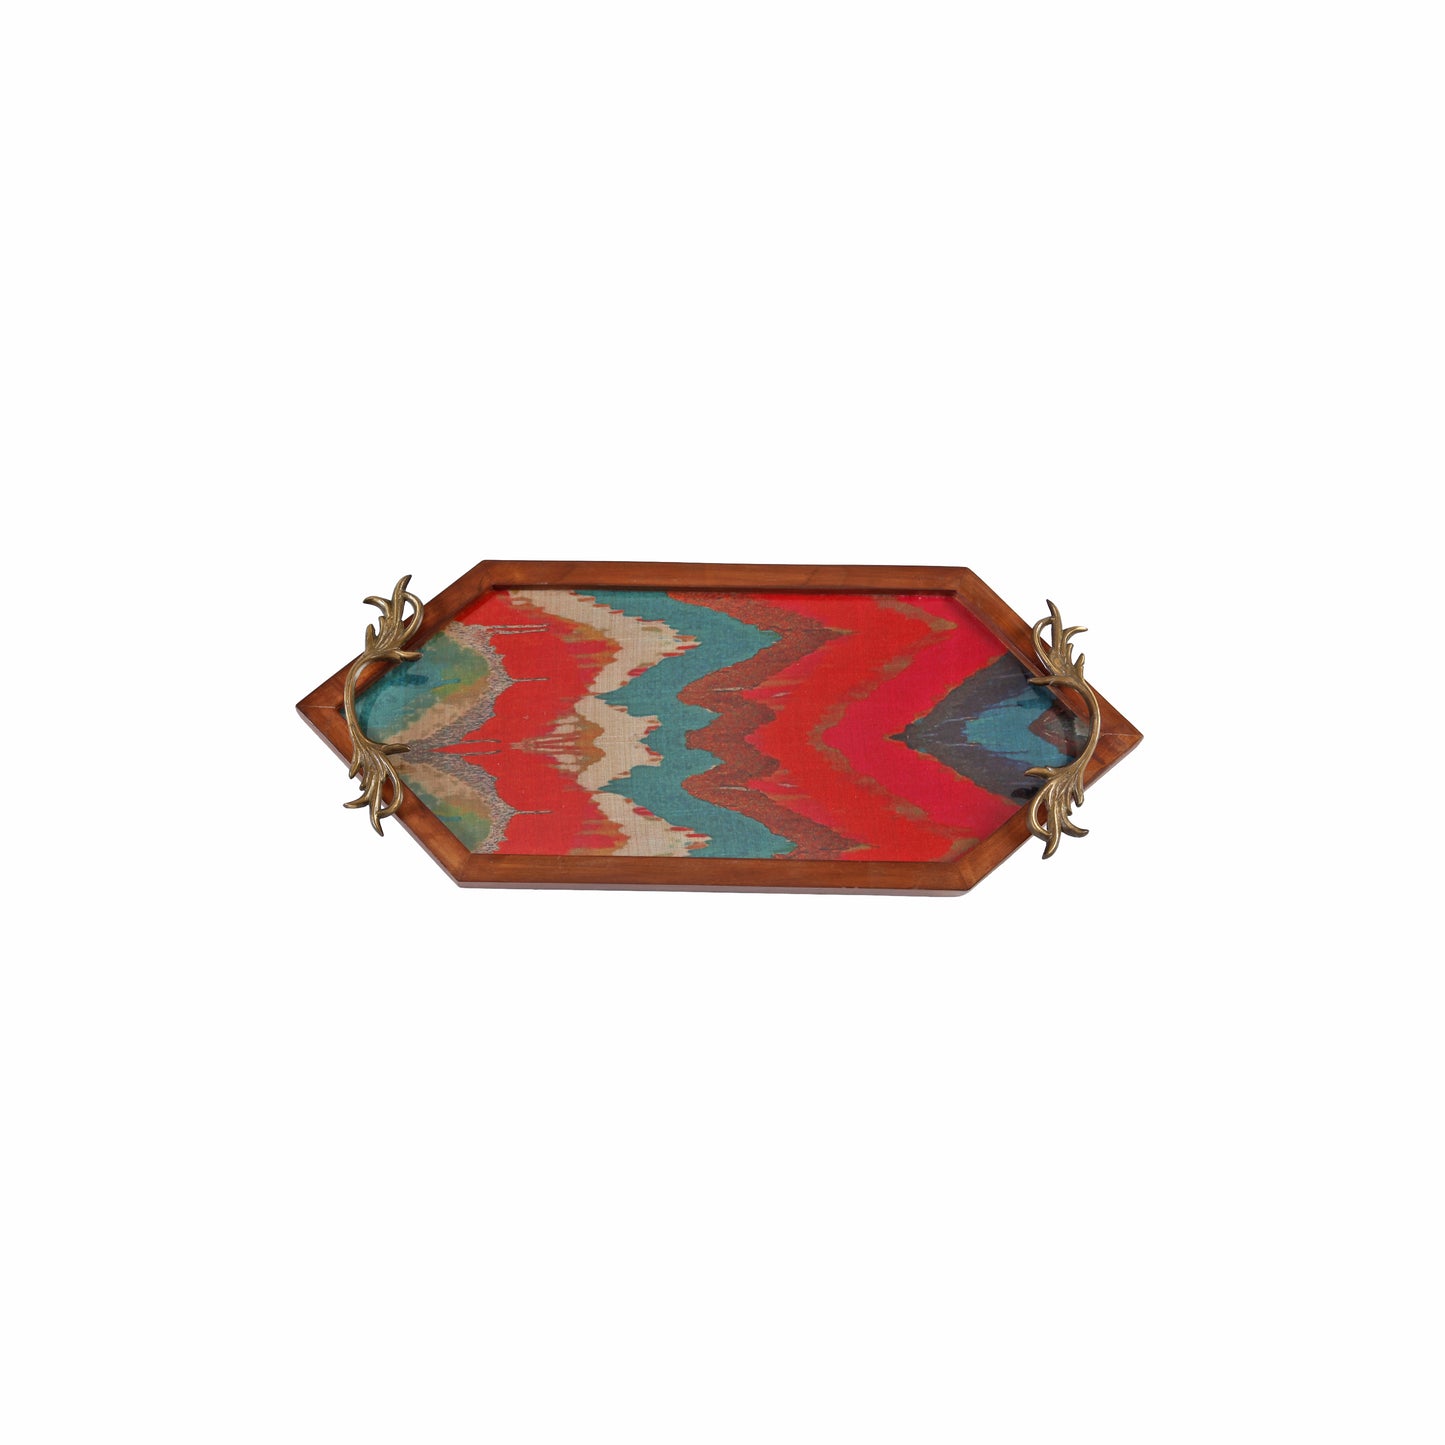 A Tiny Mistake Vibrant Ikat Print Diamond Shaped Teak Serving Tray with Brass Handle, Tray for Serving Tea and Snacks, 49 x 20 x 2 cm